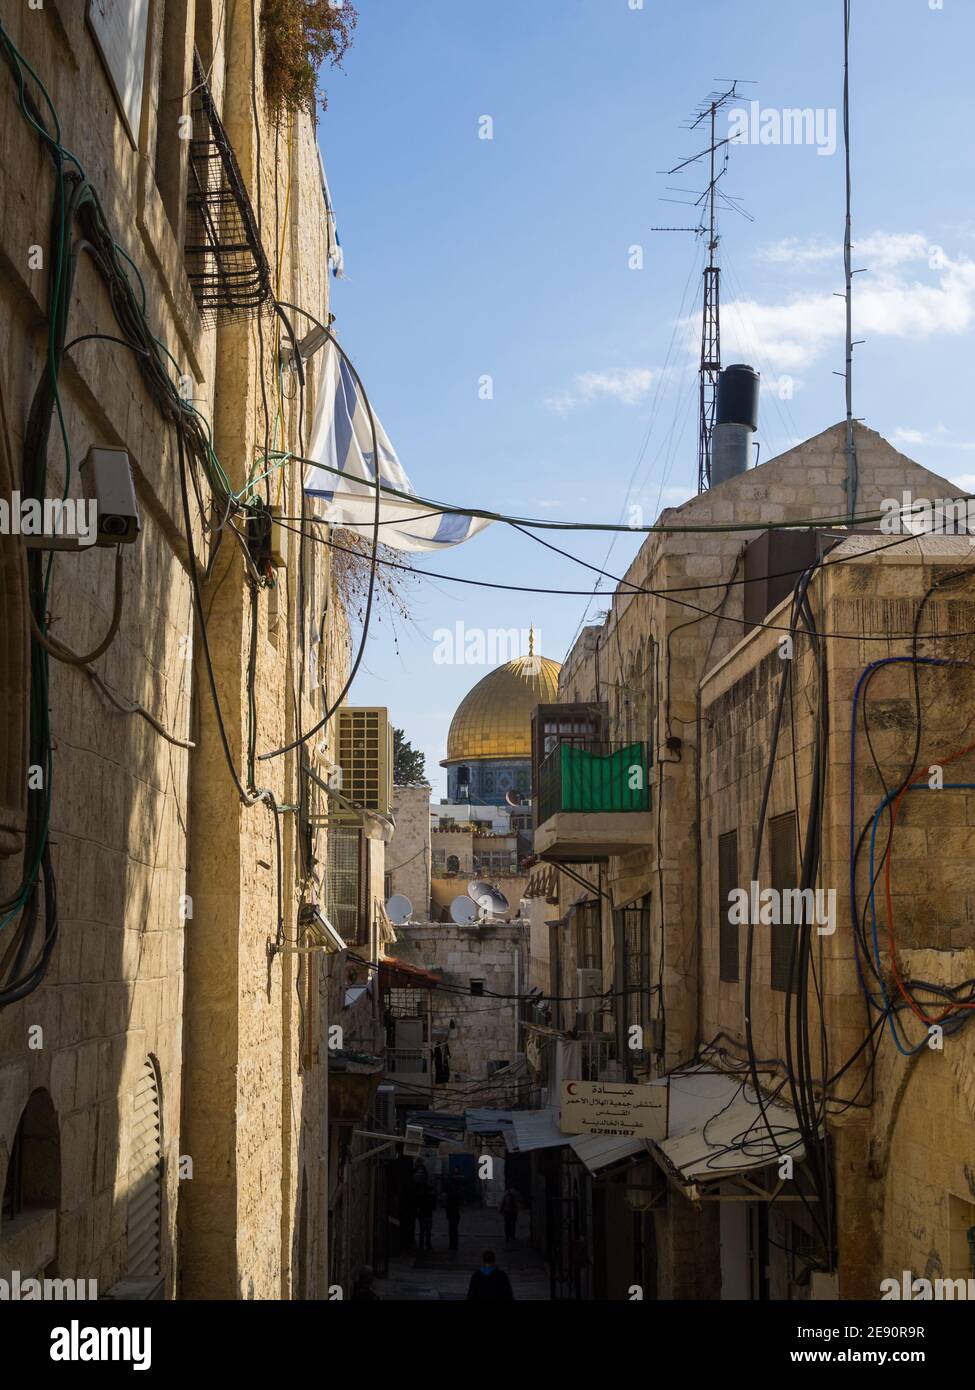 The Dome of the Rock seen at the end of a street from the Muslim Quarter of Old Jerusalem Stock Photo